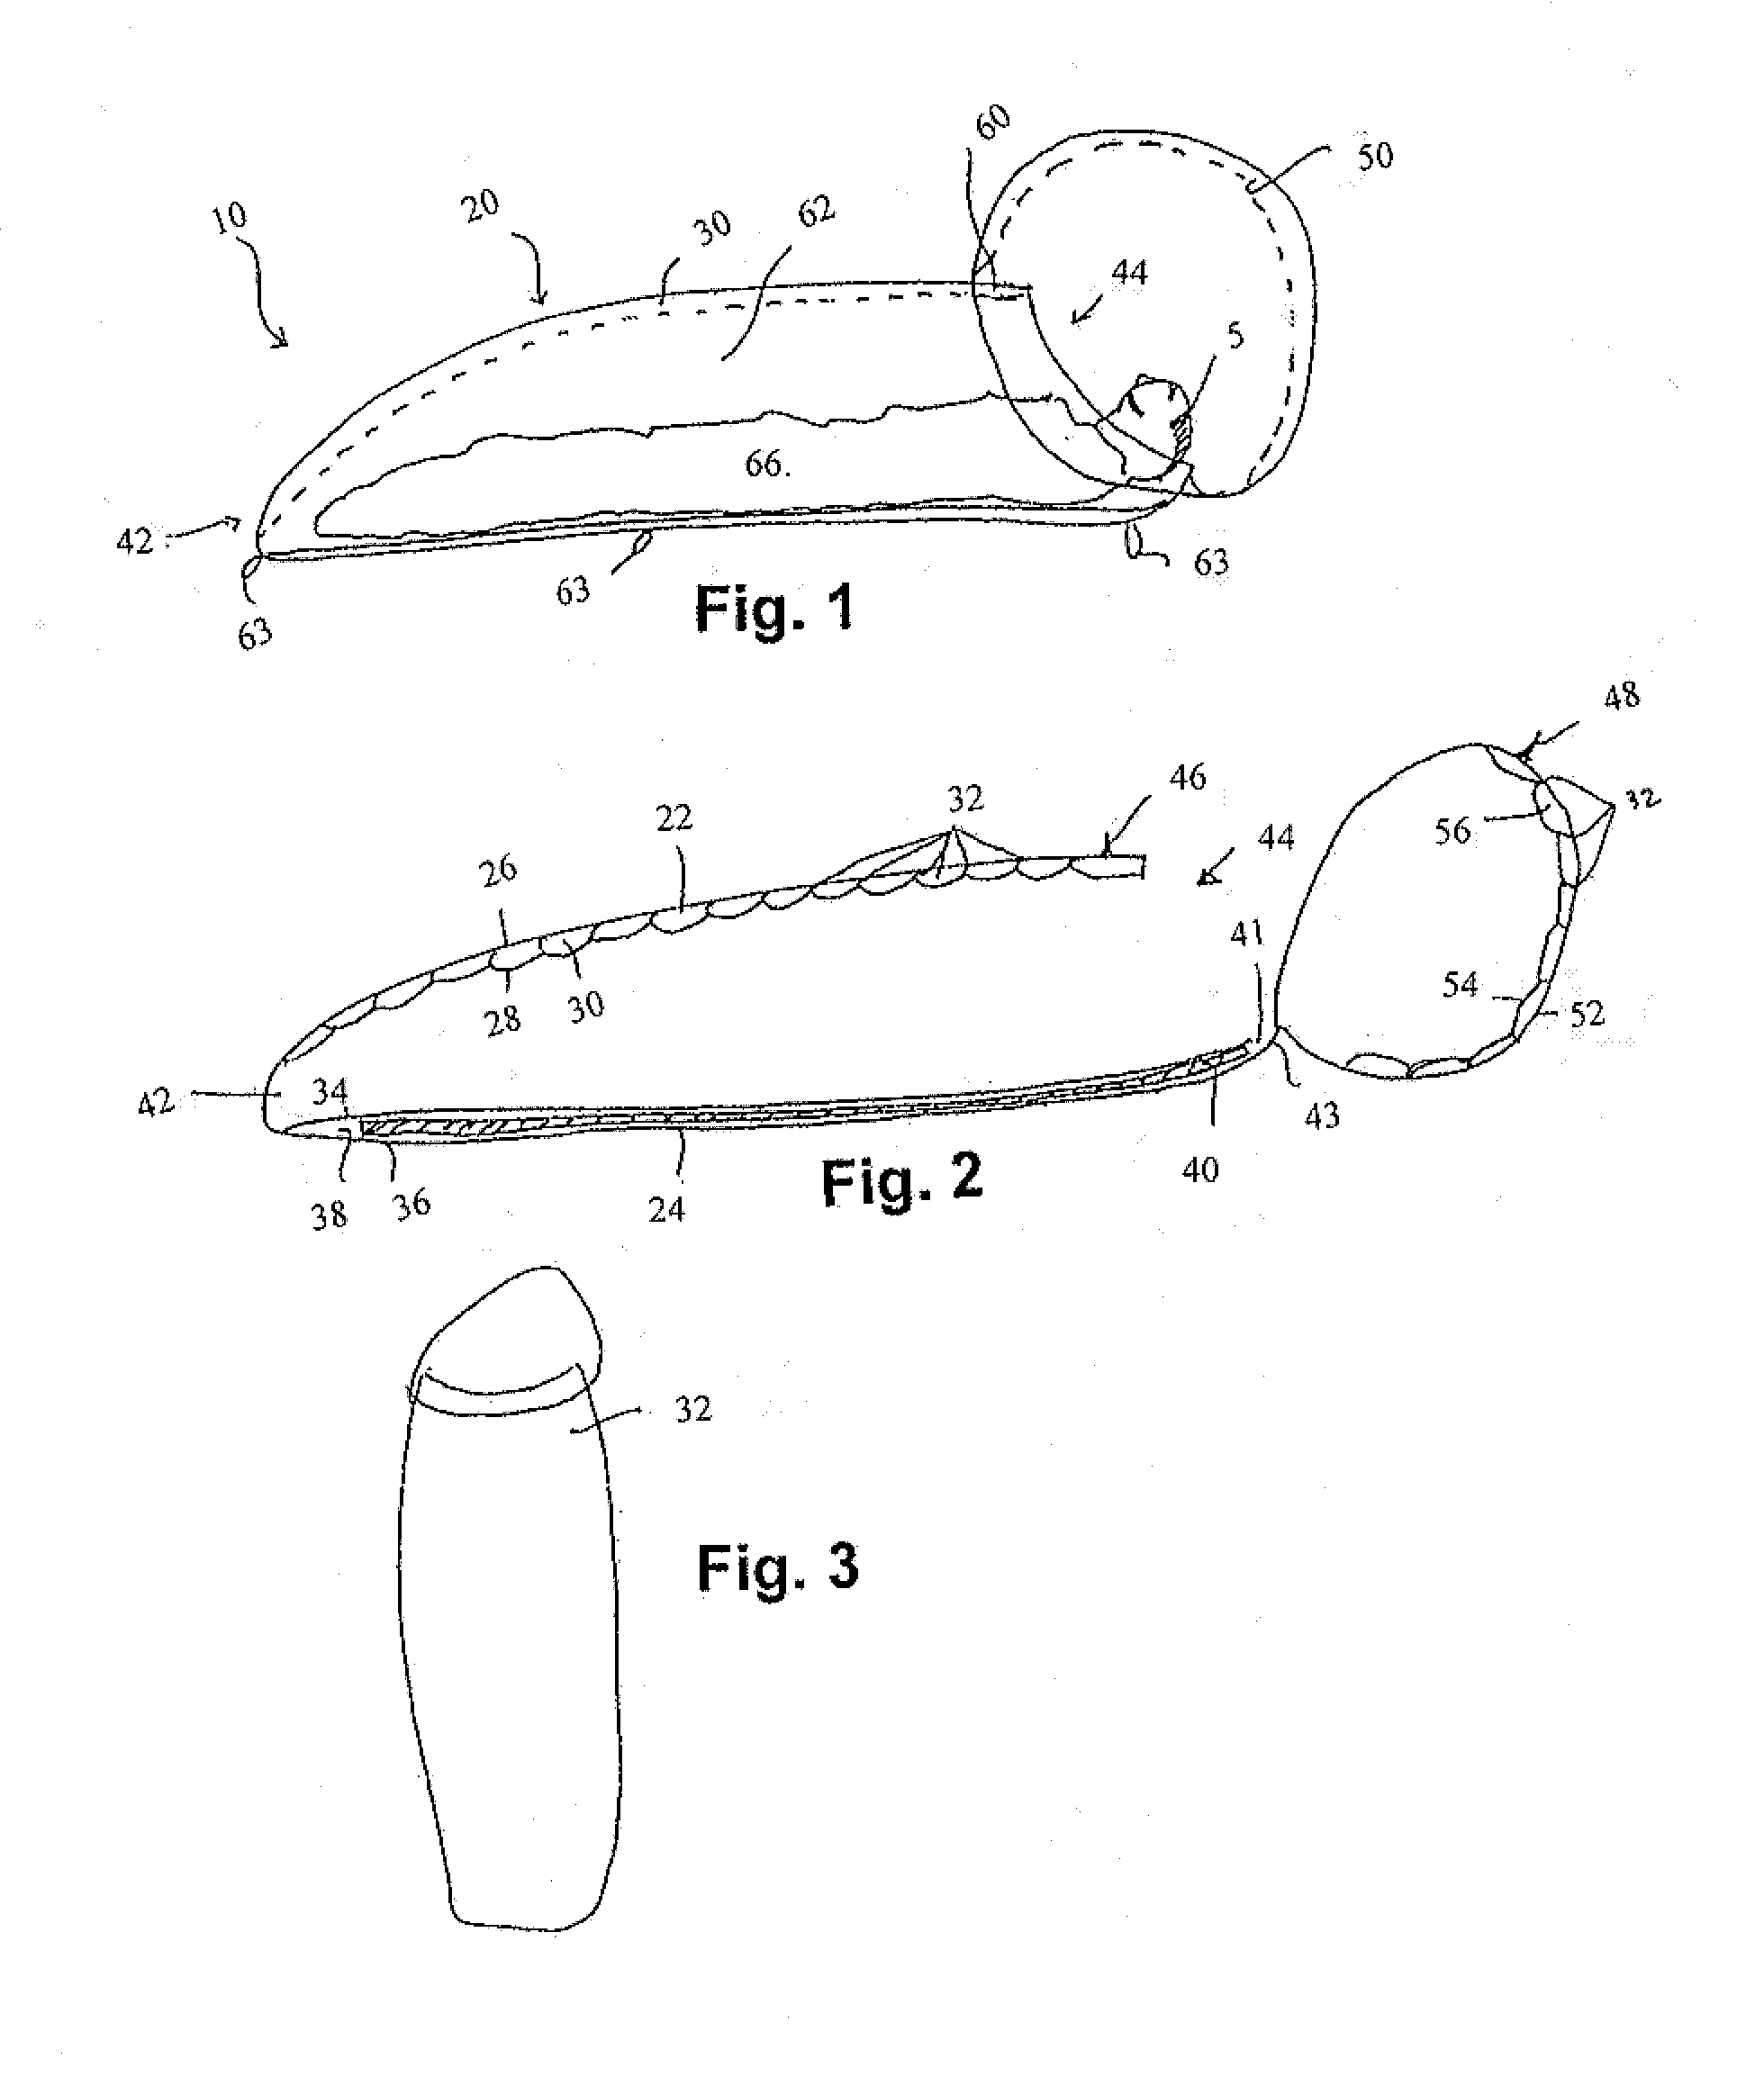 Systems and methods for providing an insulated sleeping chamber